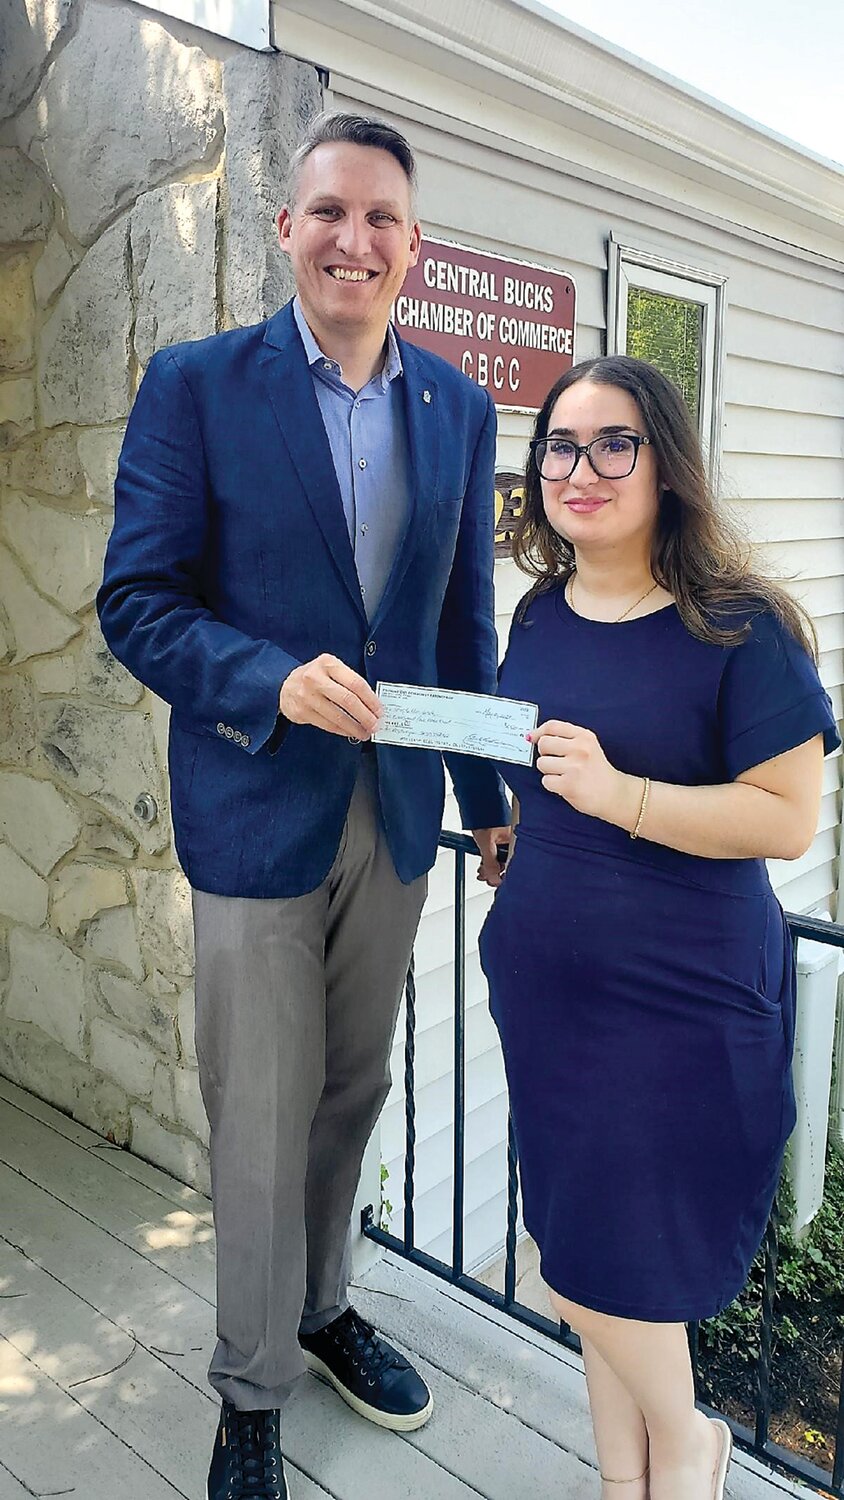 Foundations Community Partnership Executive Director Dr. Tobi Bruhn, left, awards Temple University student Ani Zeytunyan a $2,500 check as part of the Central Bucks Chamber of Commerce’s Women in Business Scholarship Program.